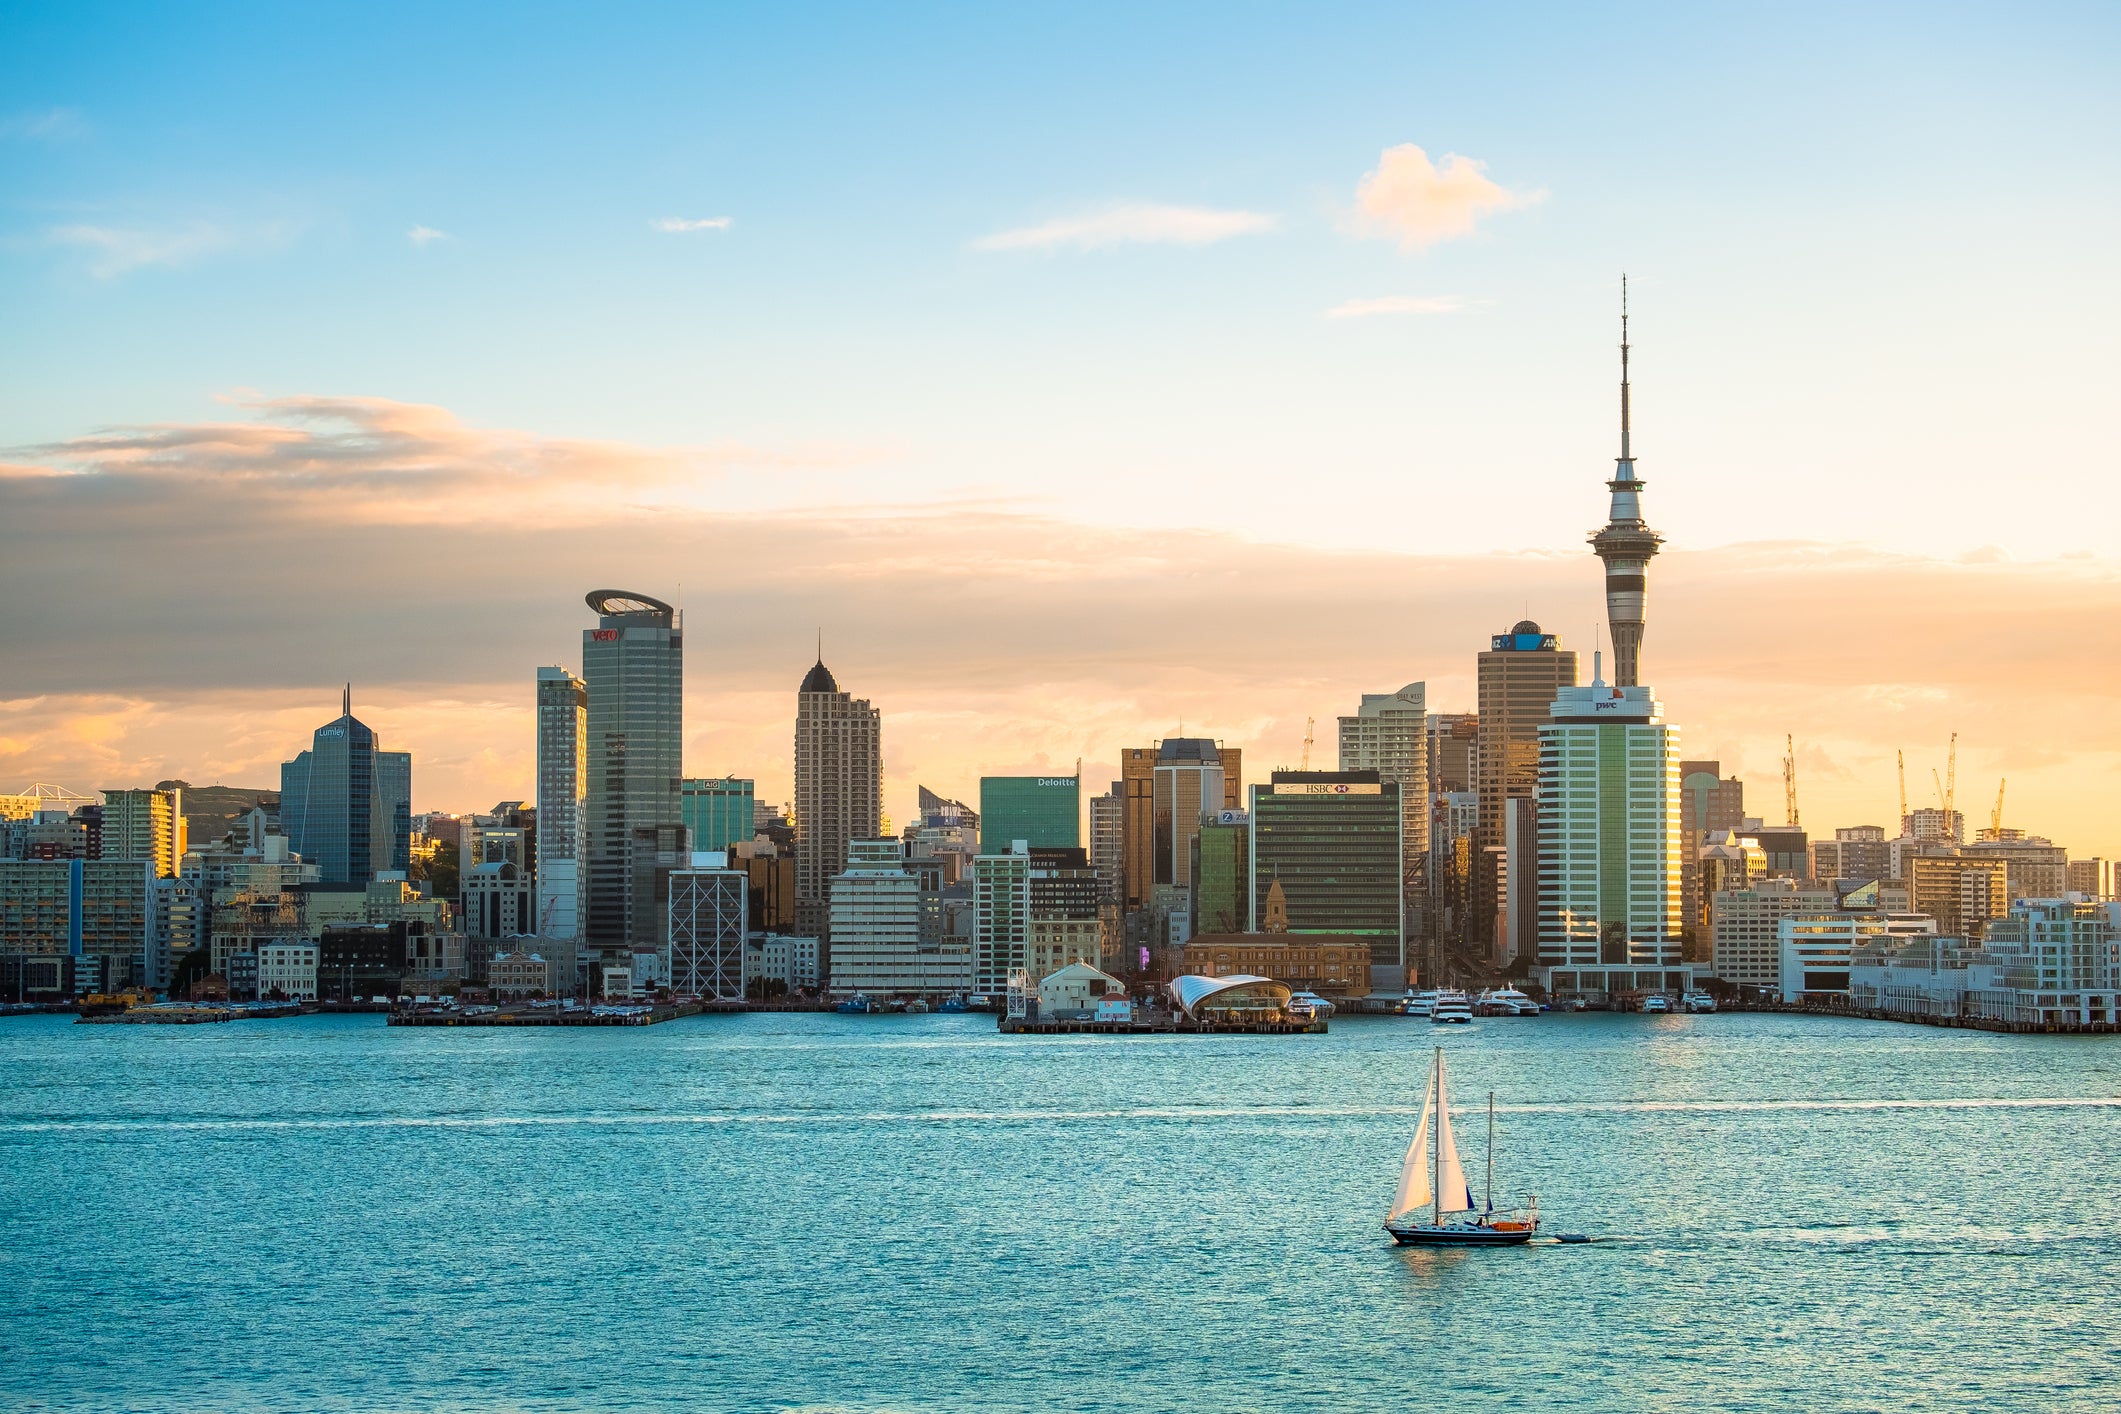 Auckland has topped the ranking